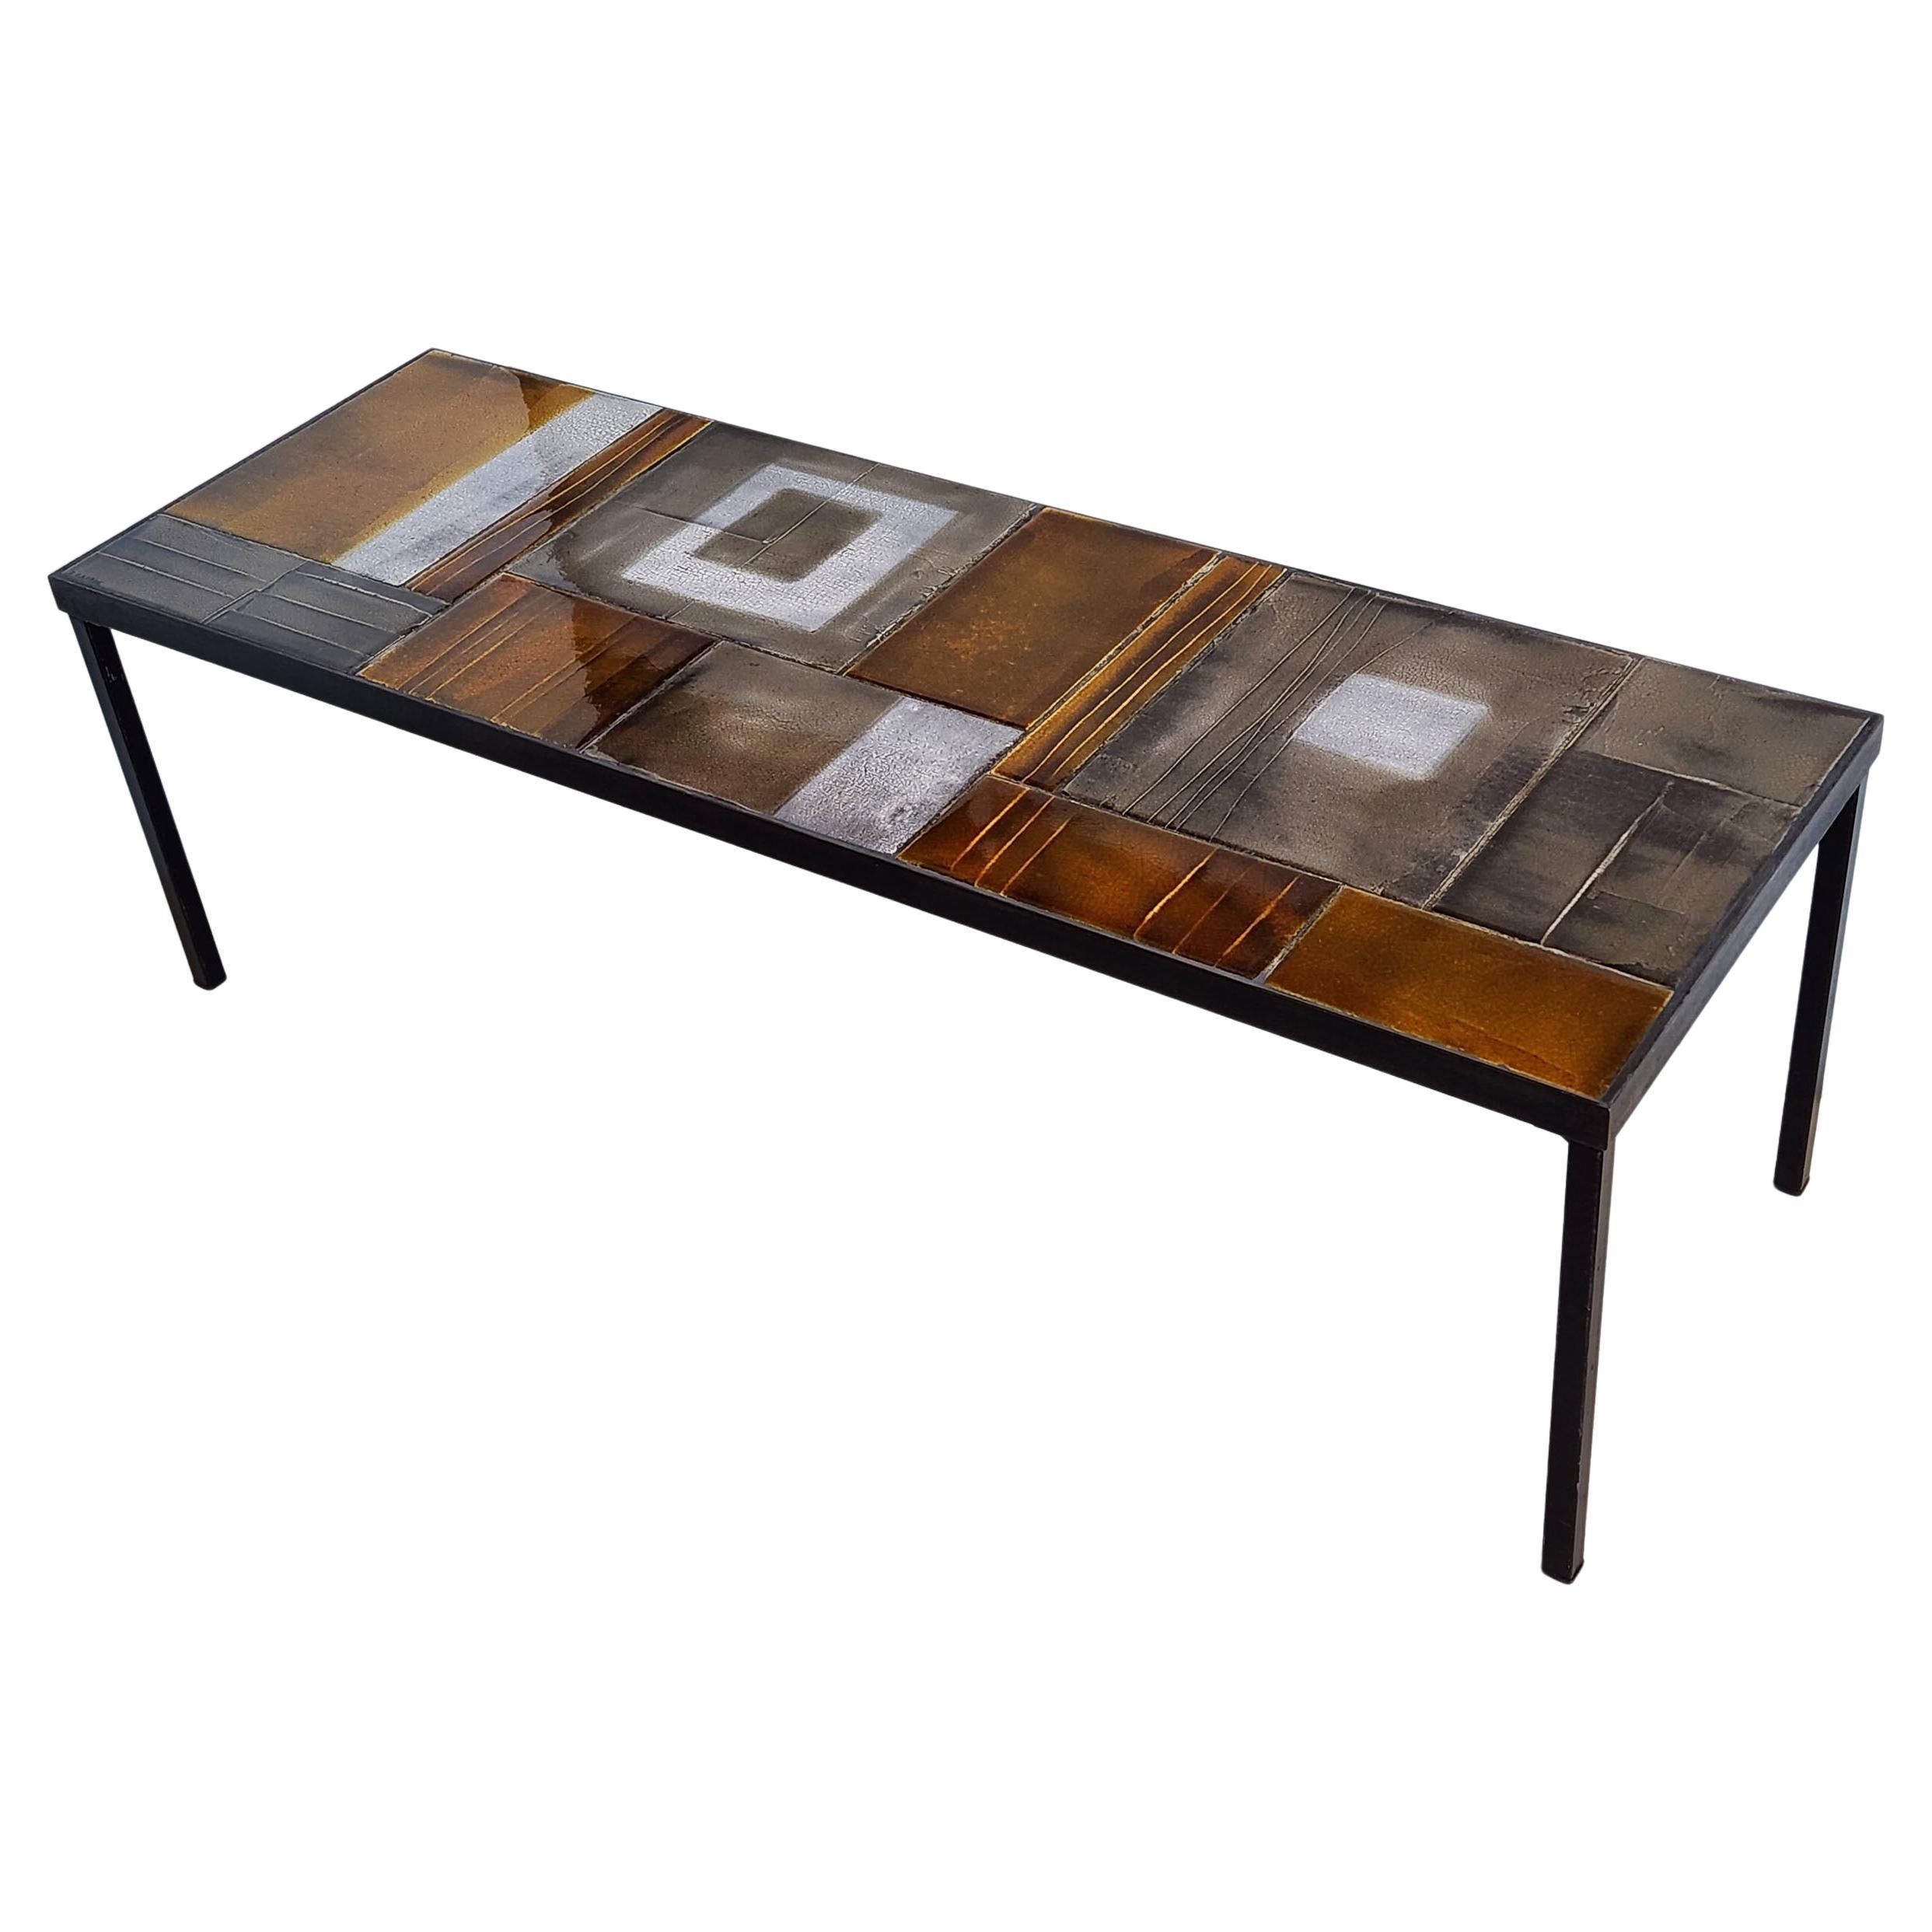 Roger Capron - Stunning Ceramic Coffee Table with Lava Tiles, Metal Frame, 1970s